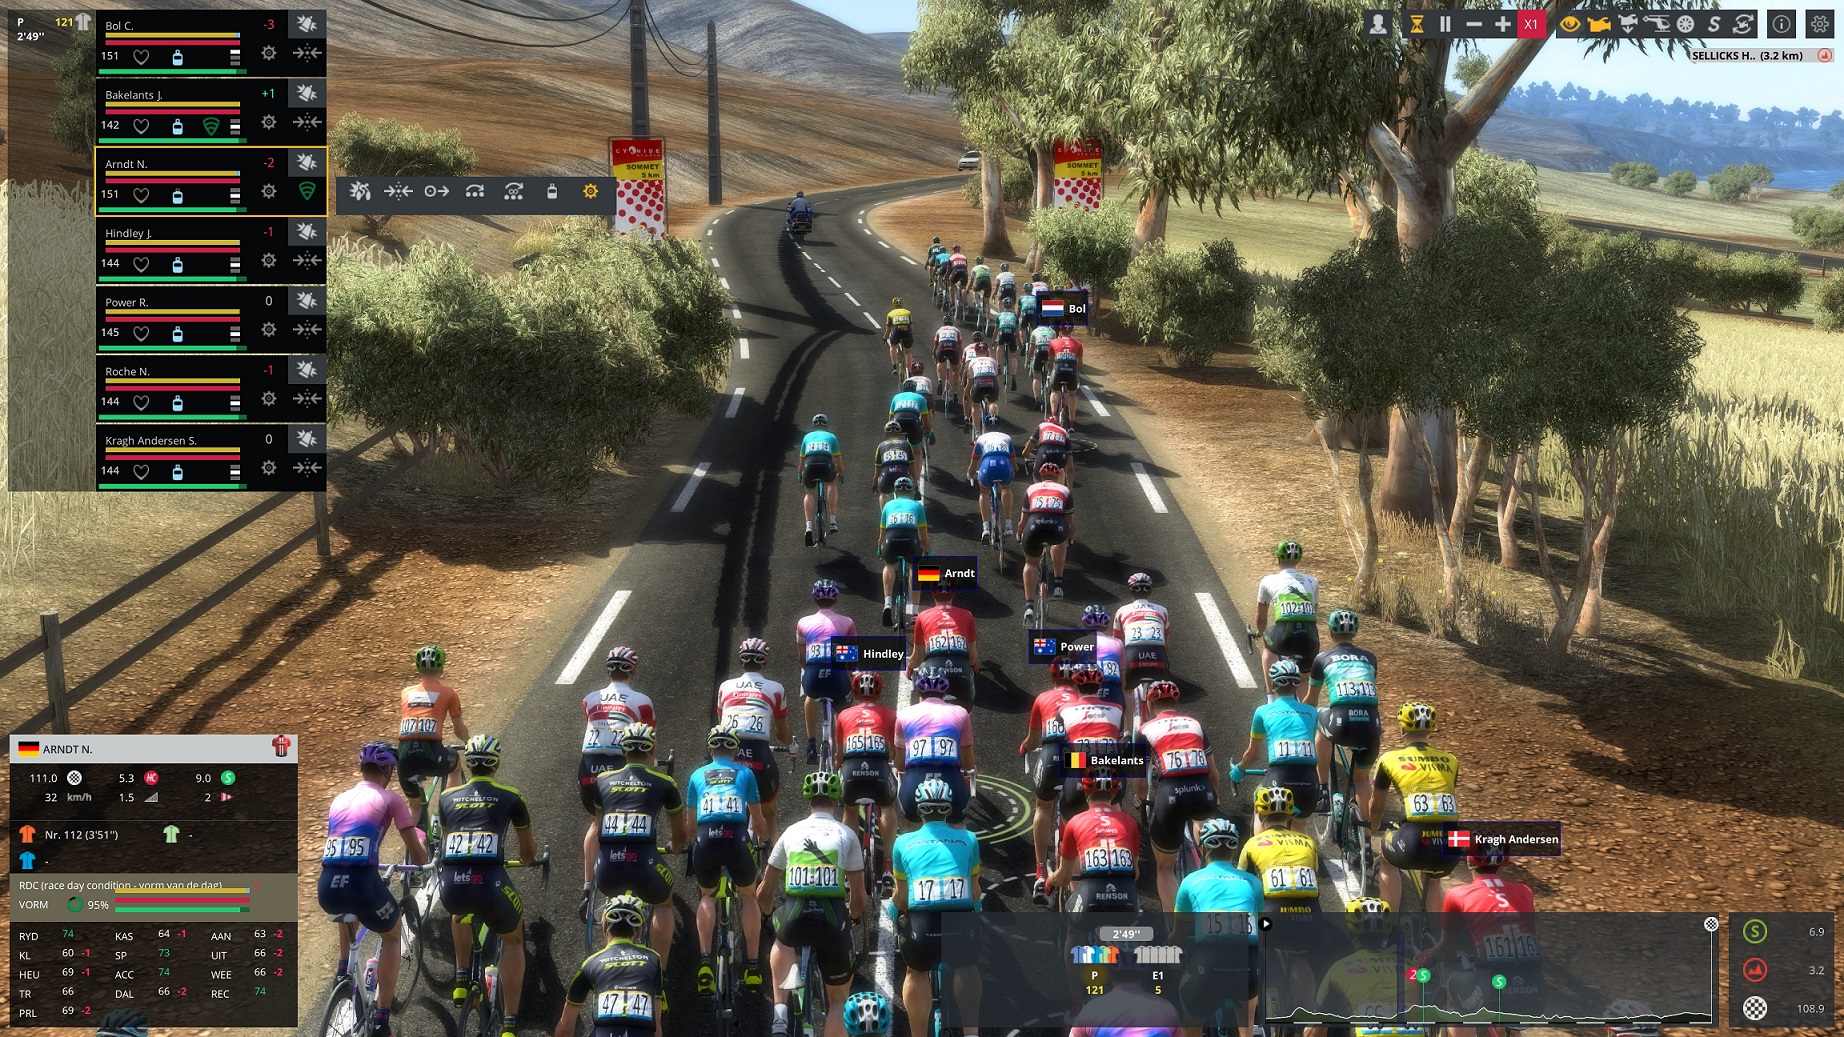 Pro Cycling Manager 2019 - Tutorial, Pro Cyclist Mode 